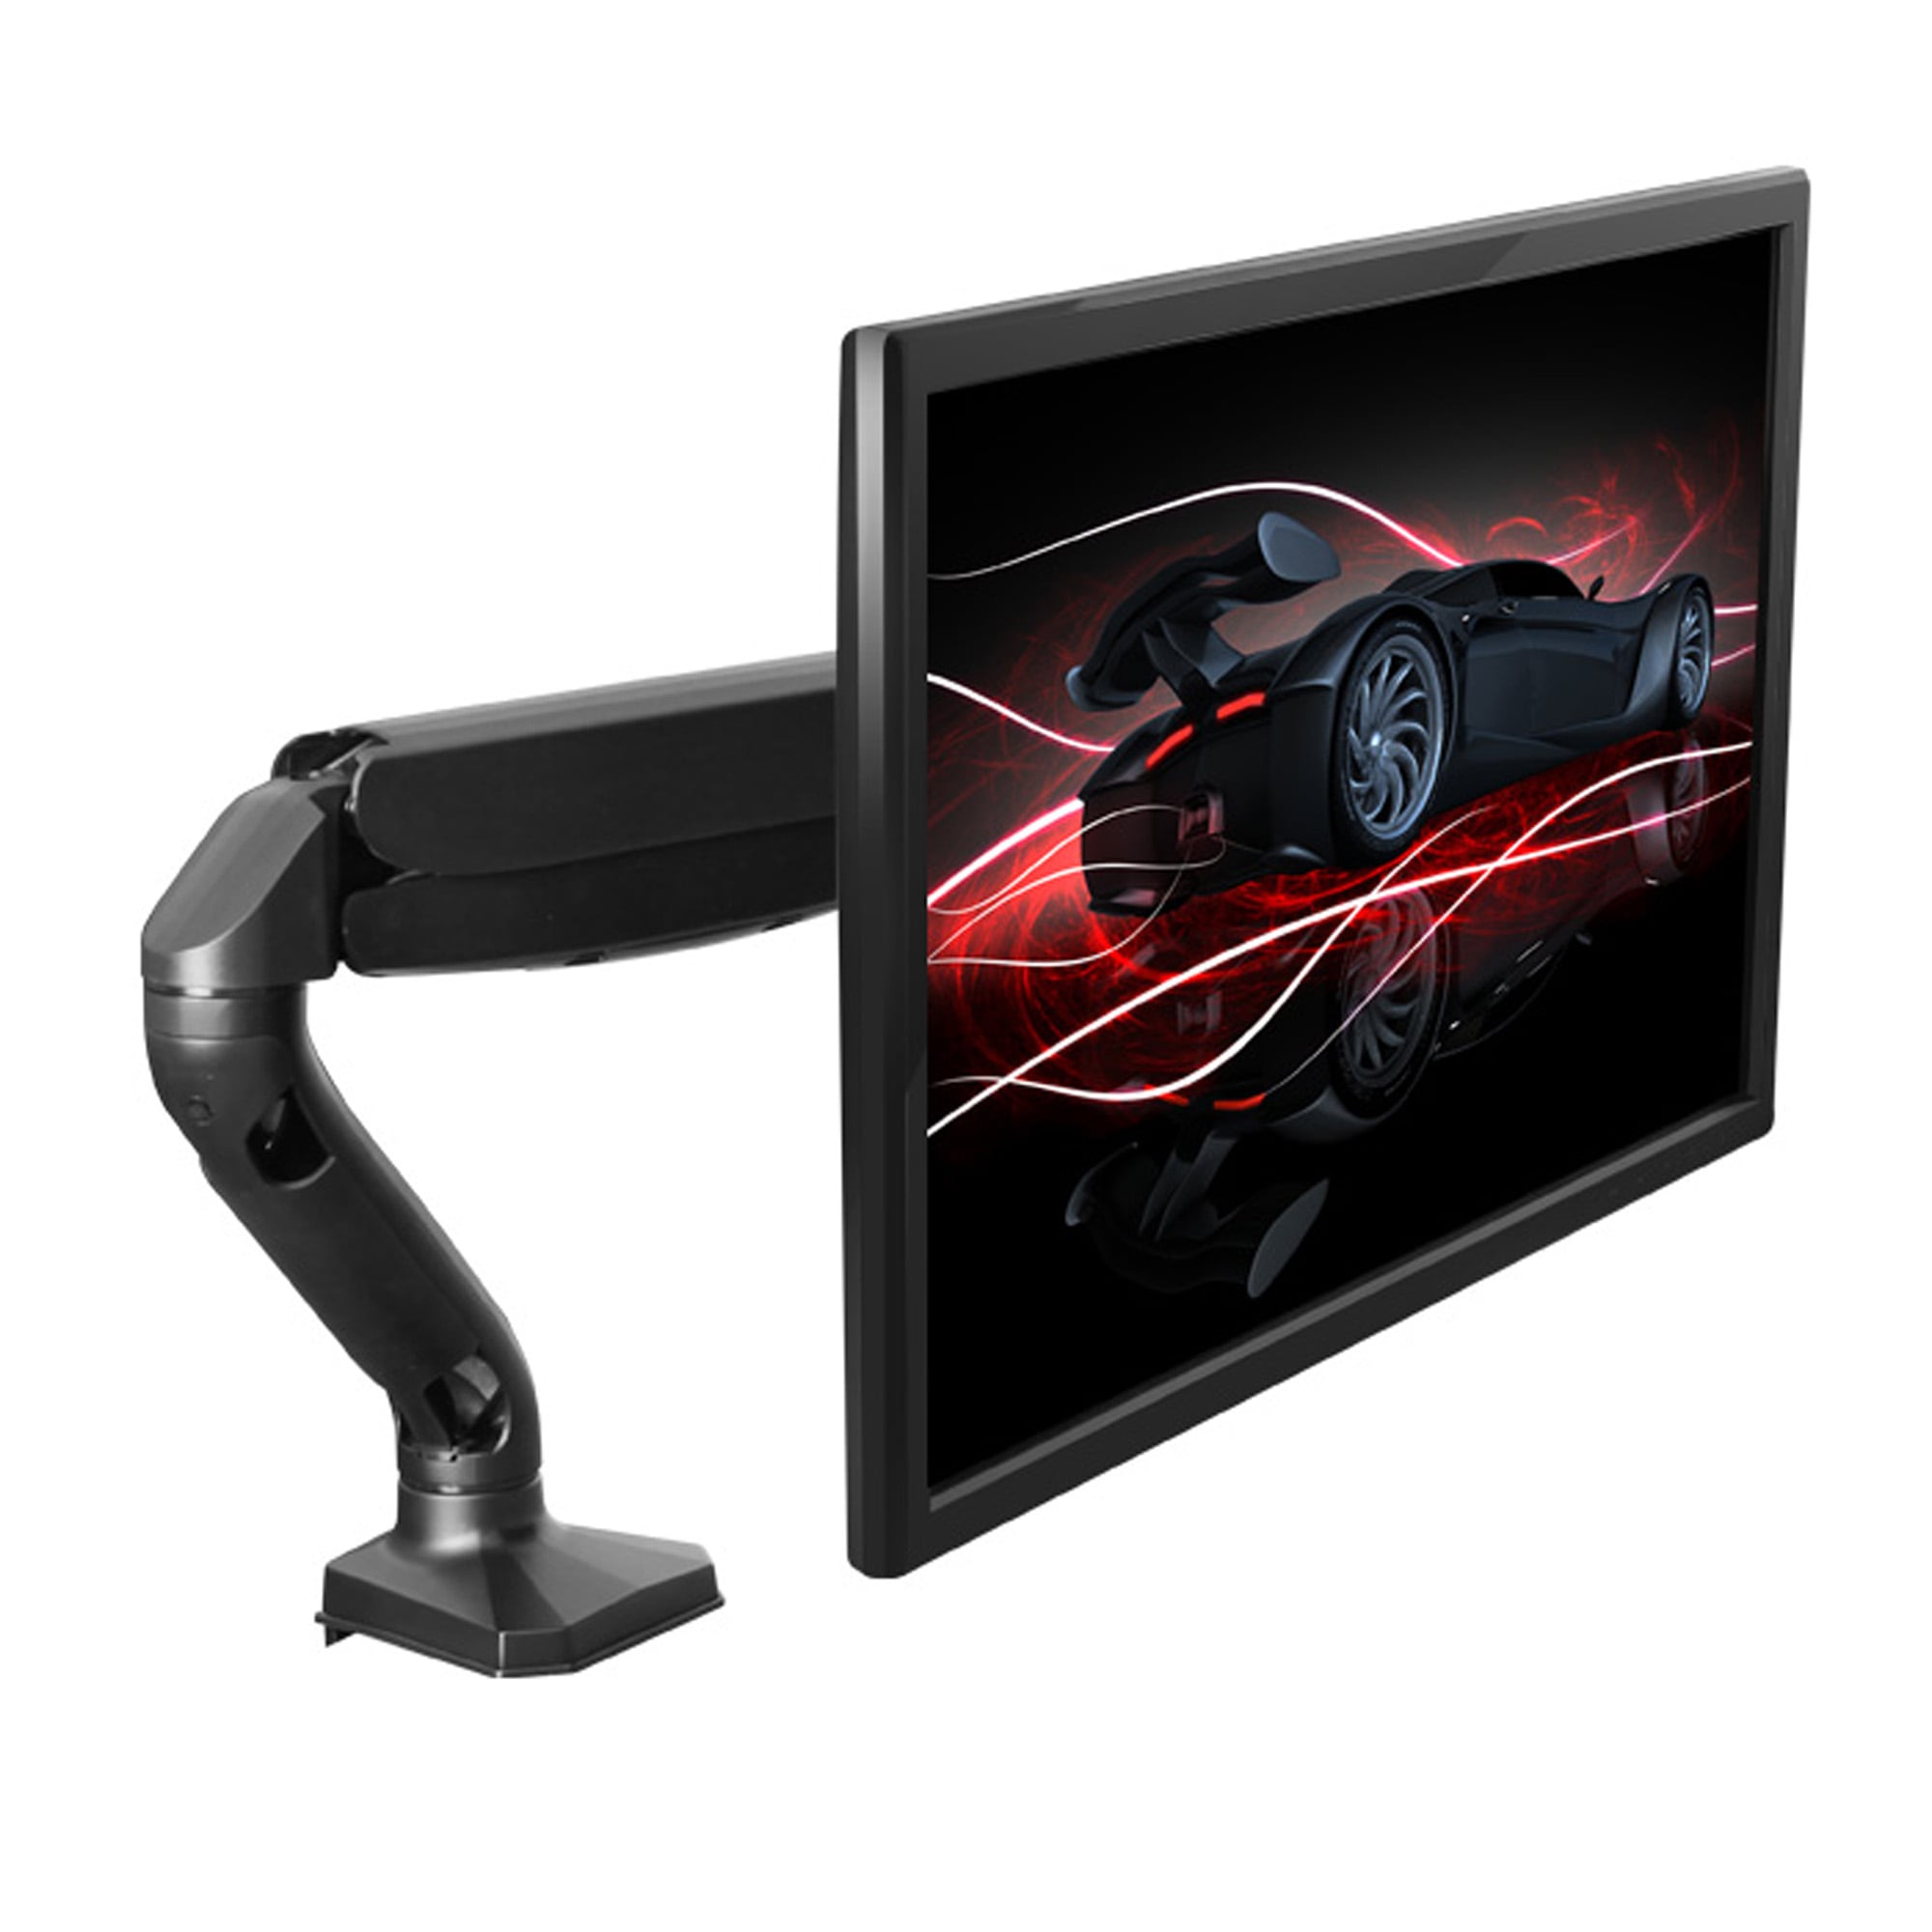 Monitor Arms - Ergonomic and Adjustable